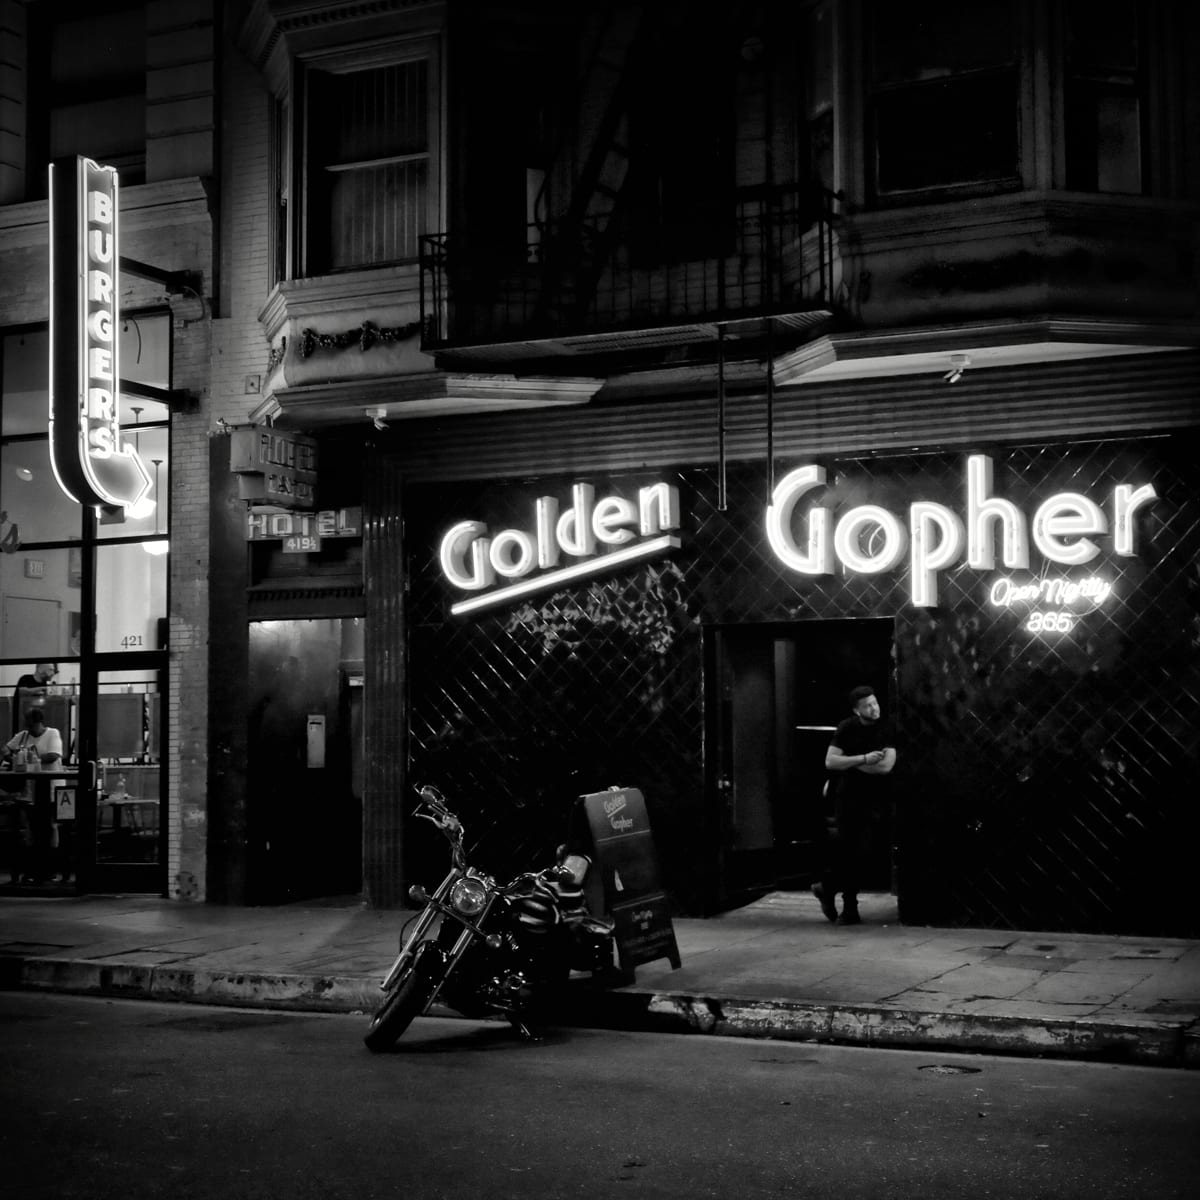 The Golden Gopher by Mark Peacock  Image: Photograph